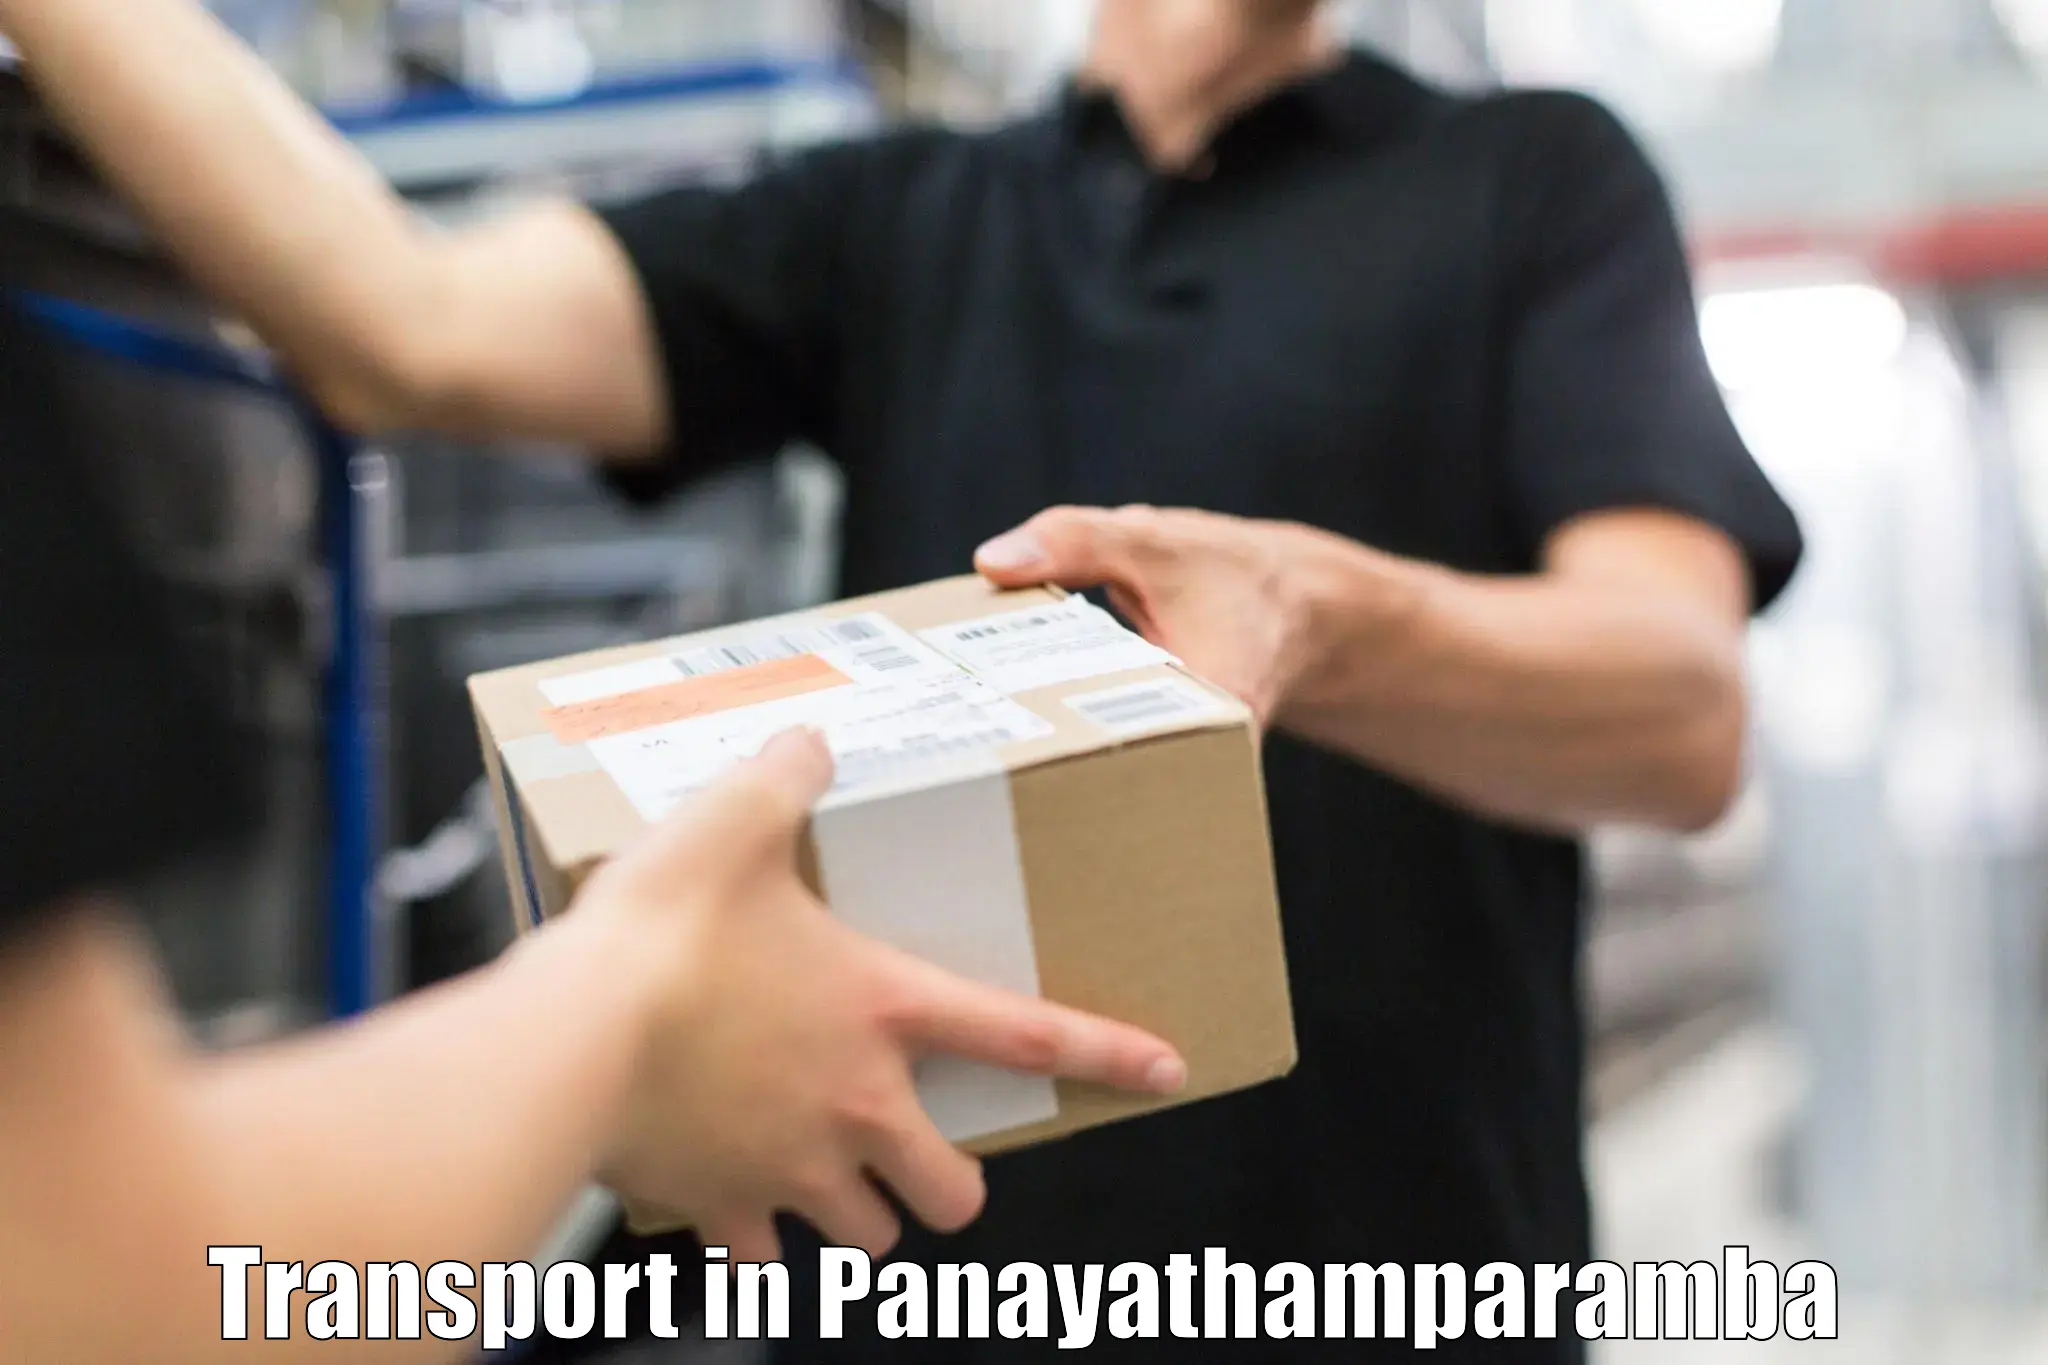 Package delivery services in Panayathamparamba